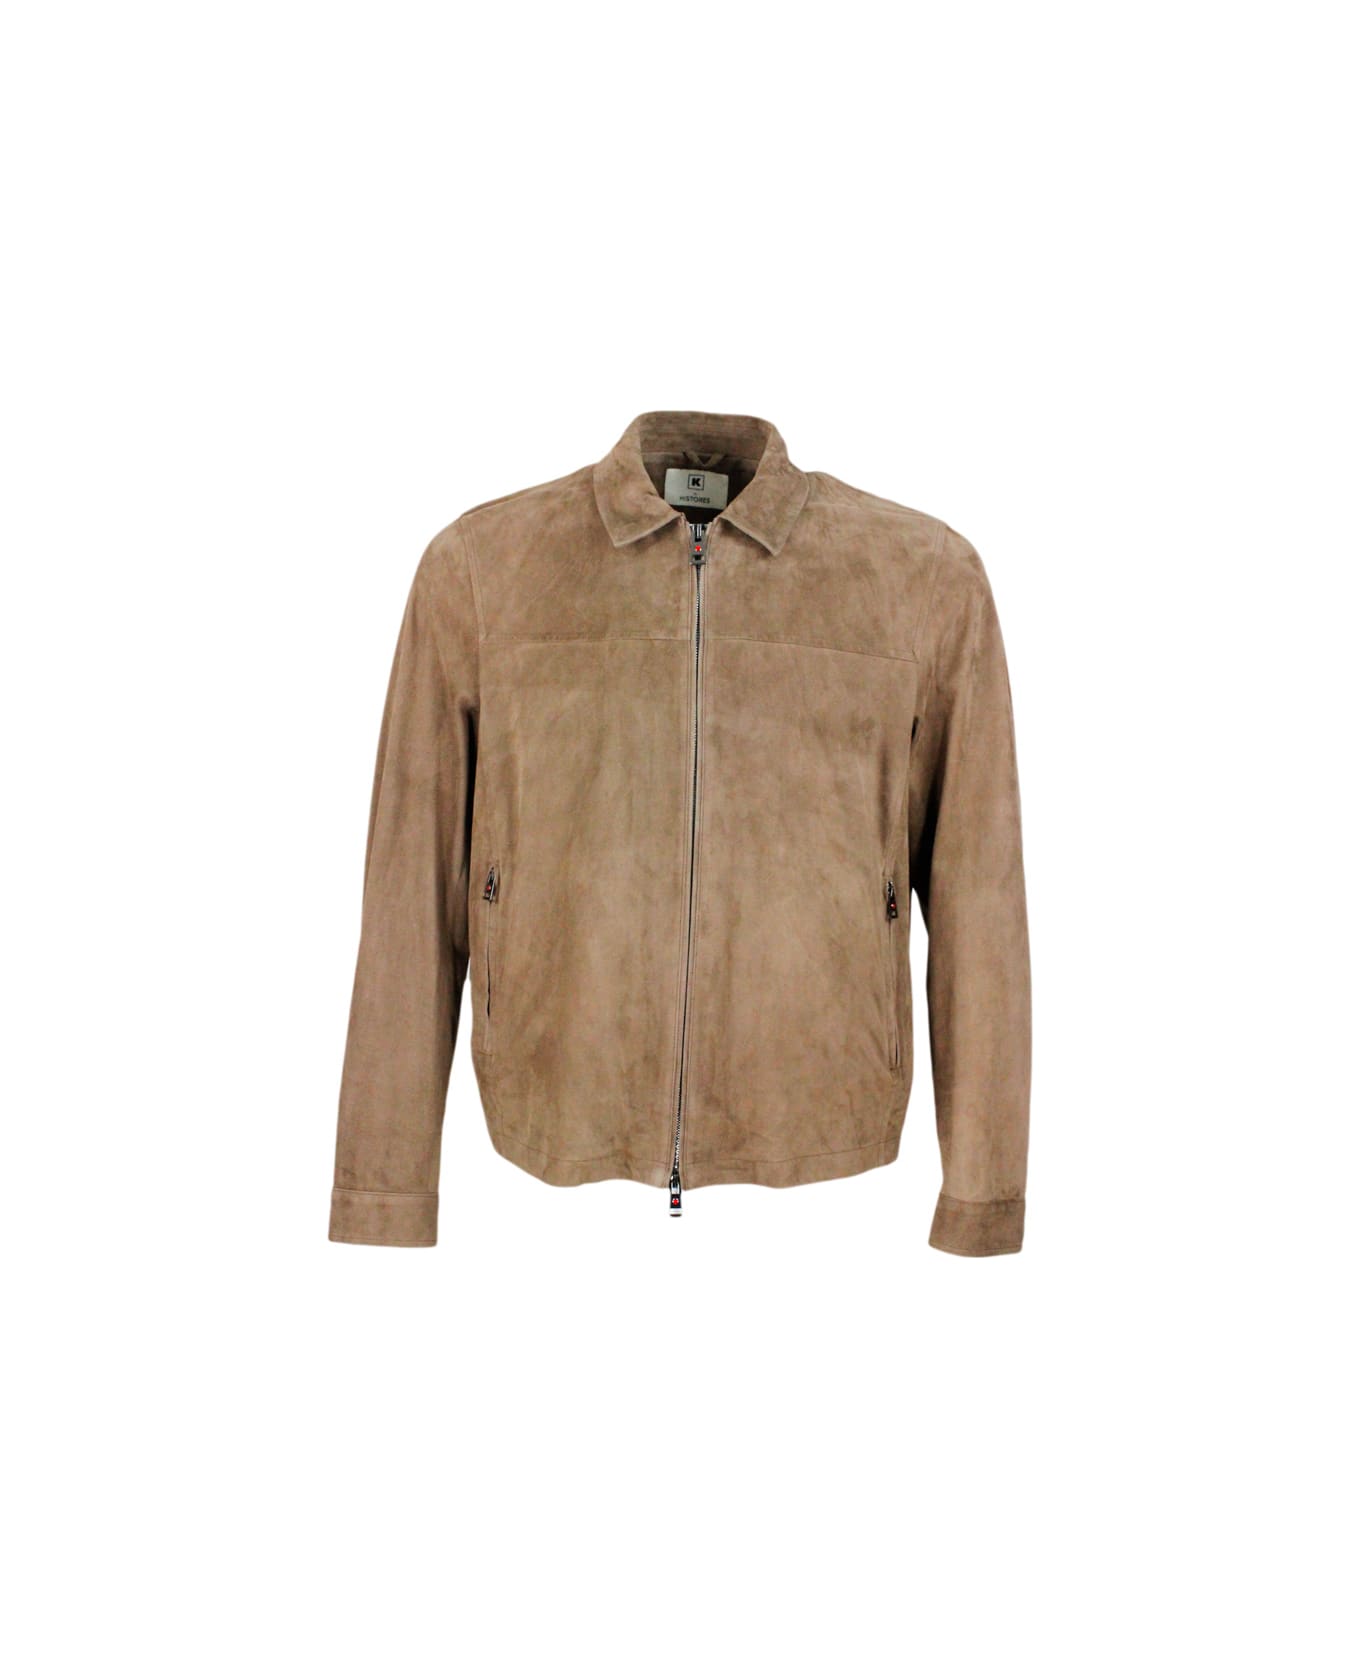 Kired Lightweight Unlined Jacket In Very Soft Suede With Shirt Collar And Zip Closure - Beige - dove 